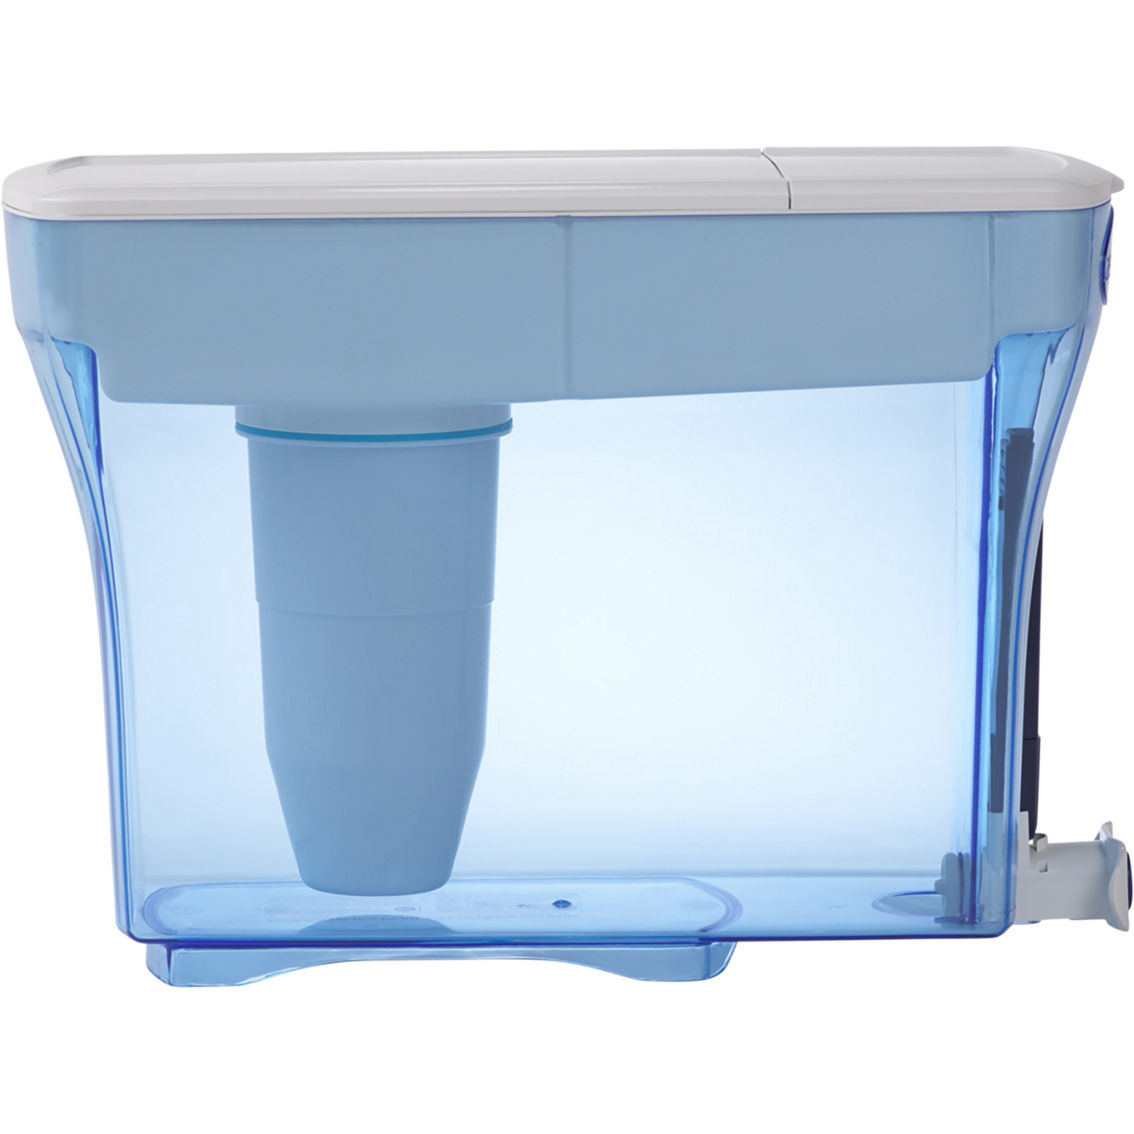 ZeroWater 30 Cup Ready Pour Dispenser - Image 3 of 6